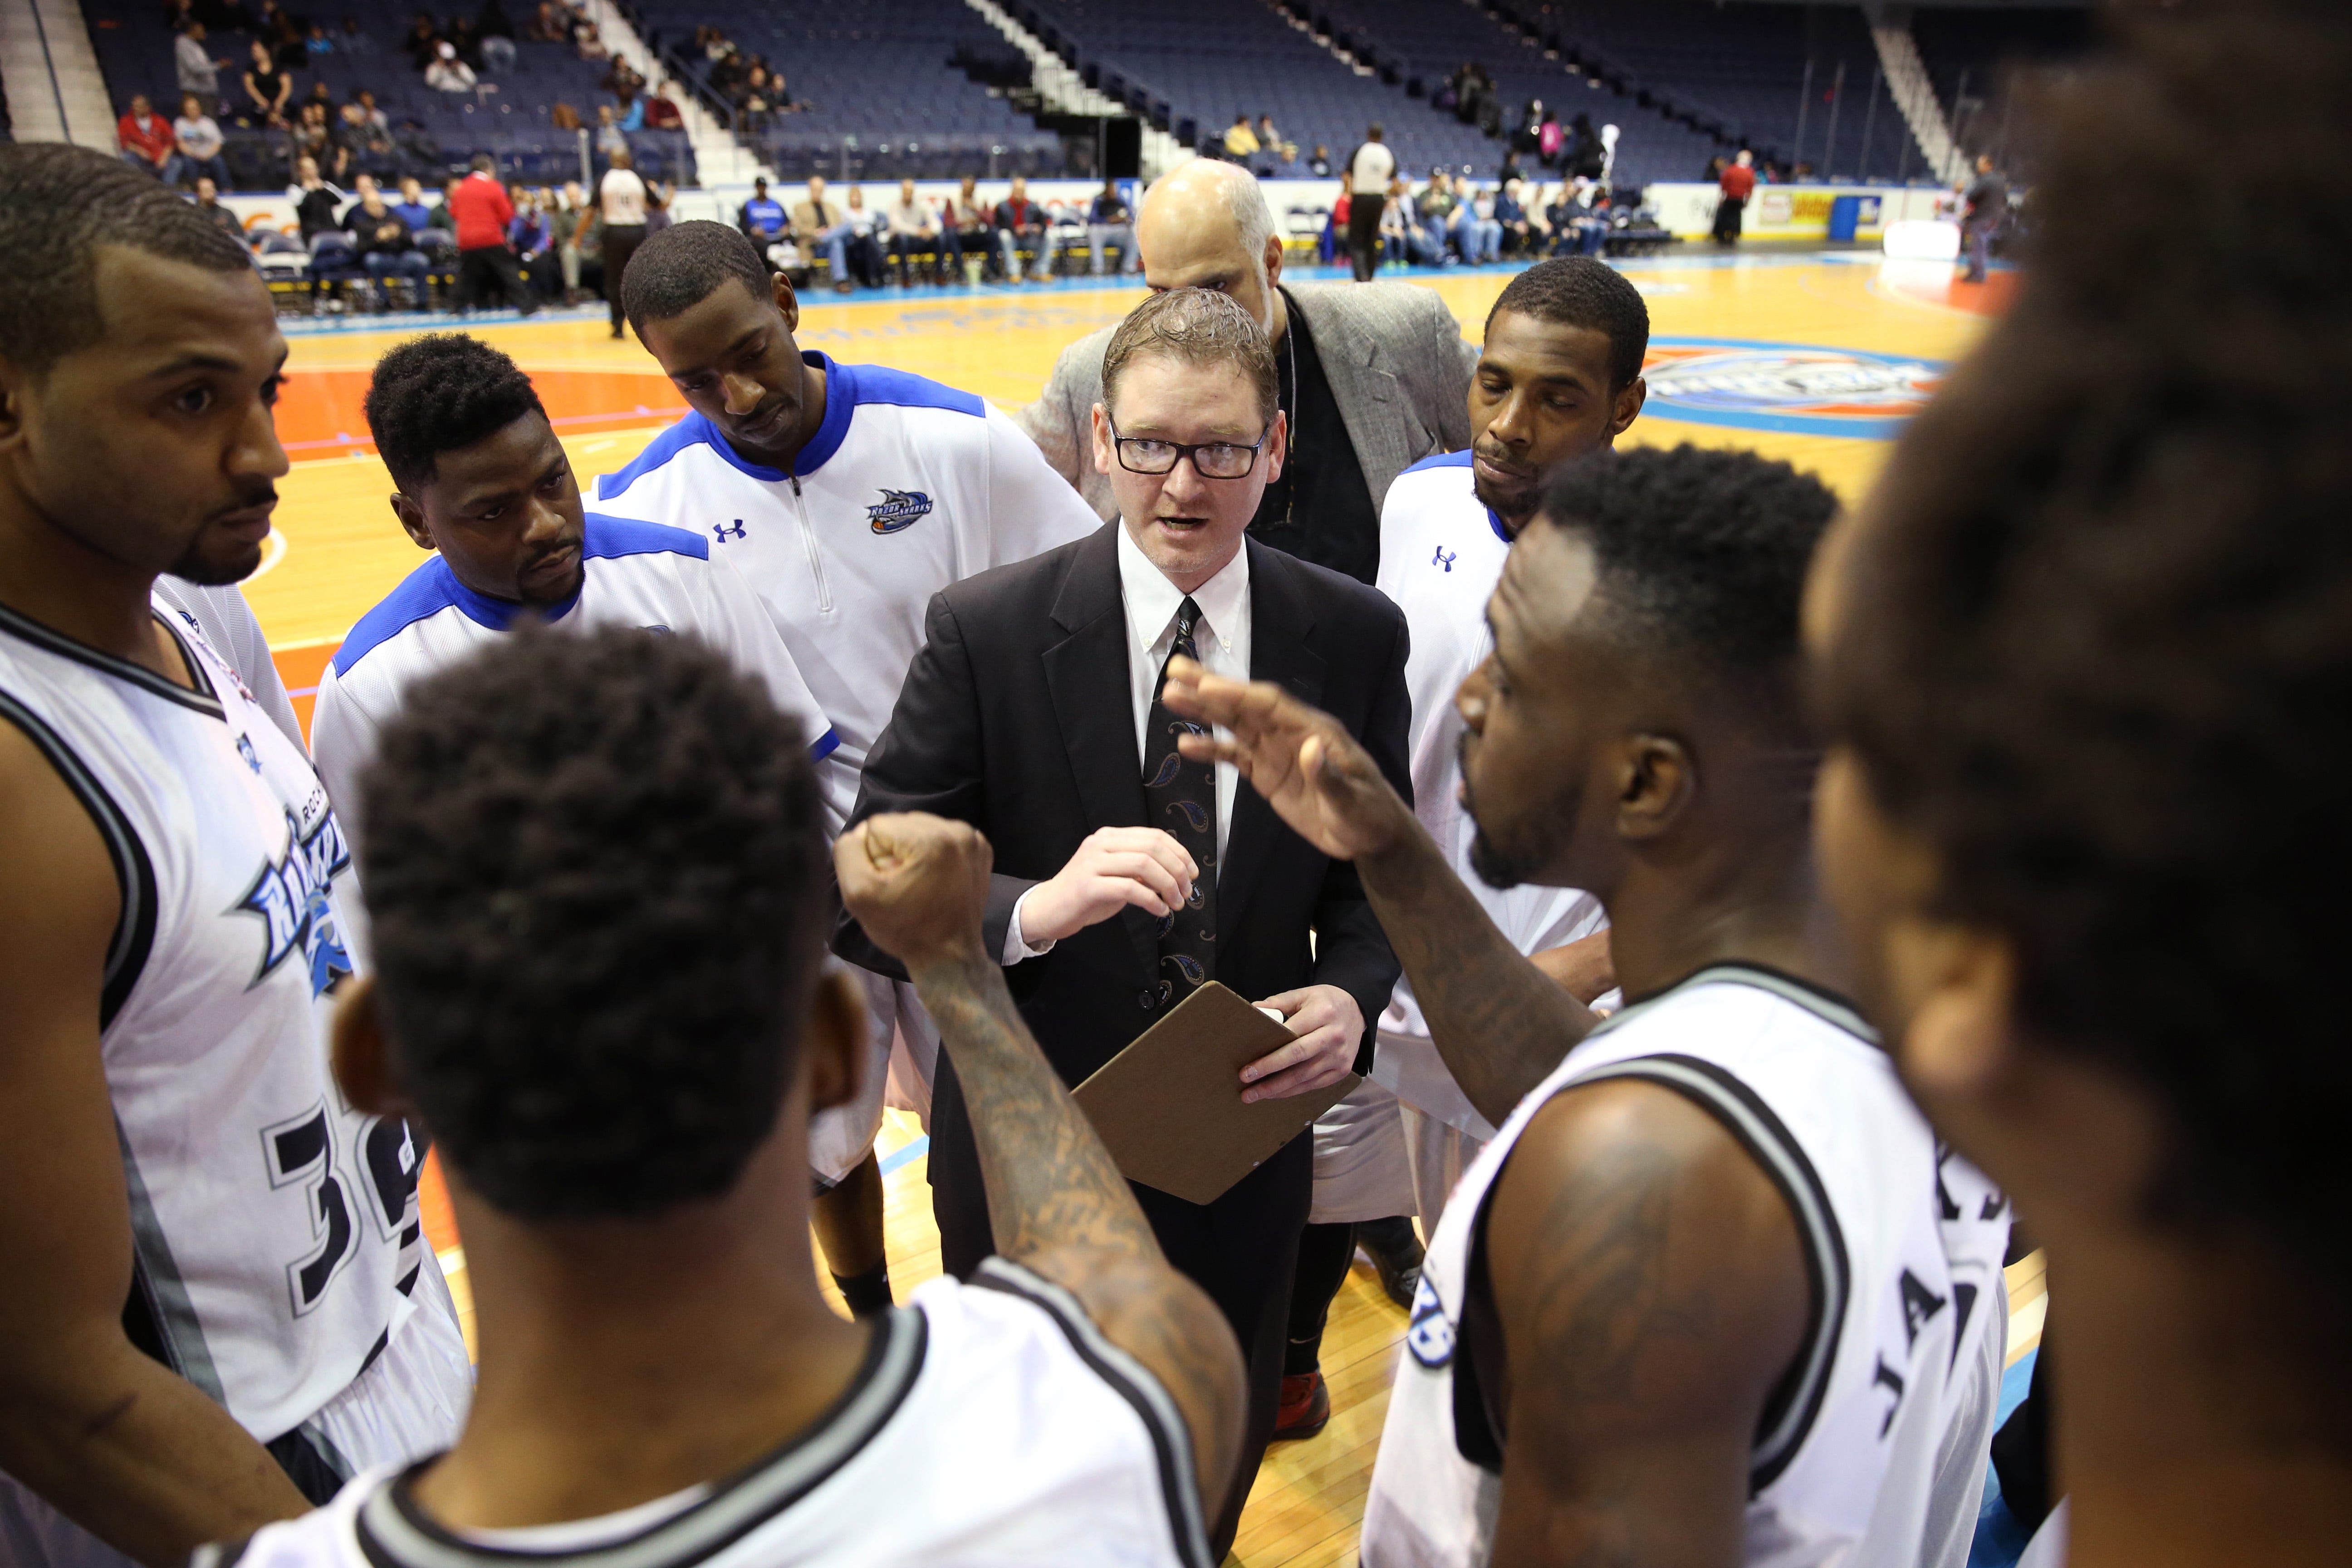 Founder moves to regain control of RazorSharks: &apos;I couldn&apos;t let it go like it was going&apos;